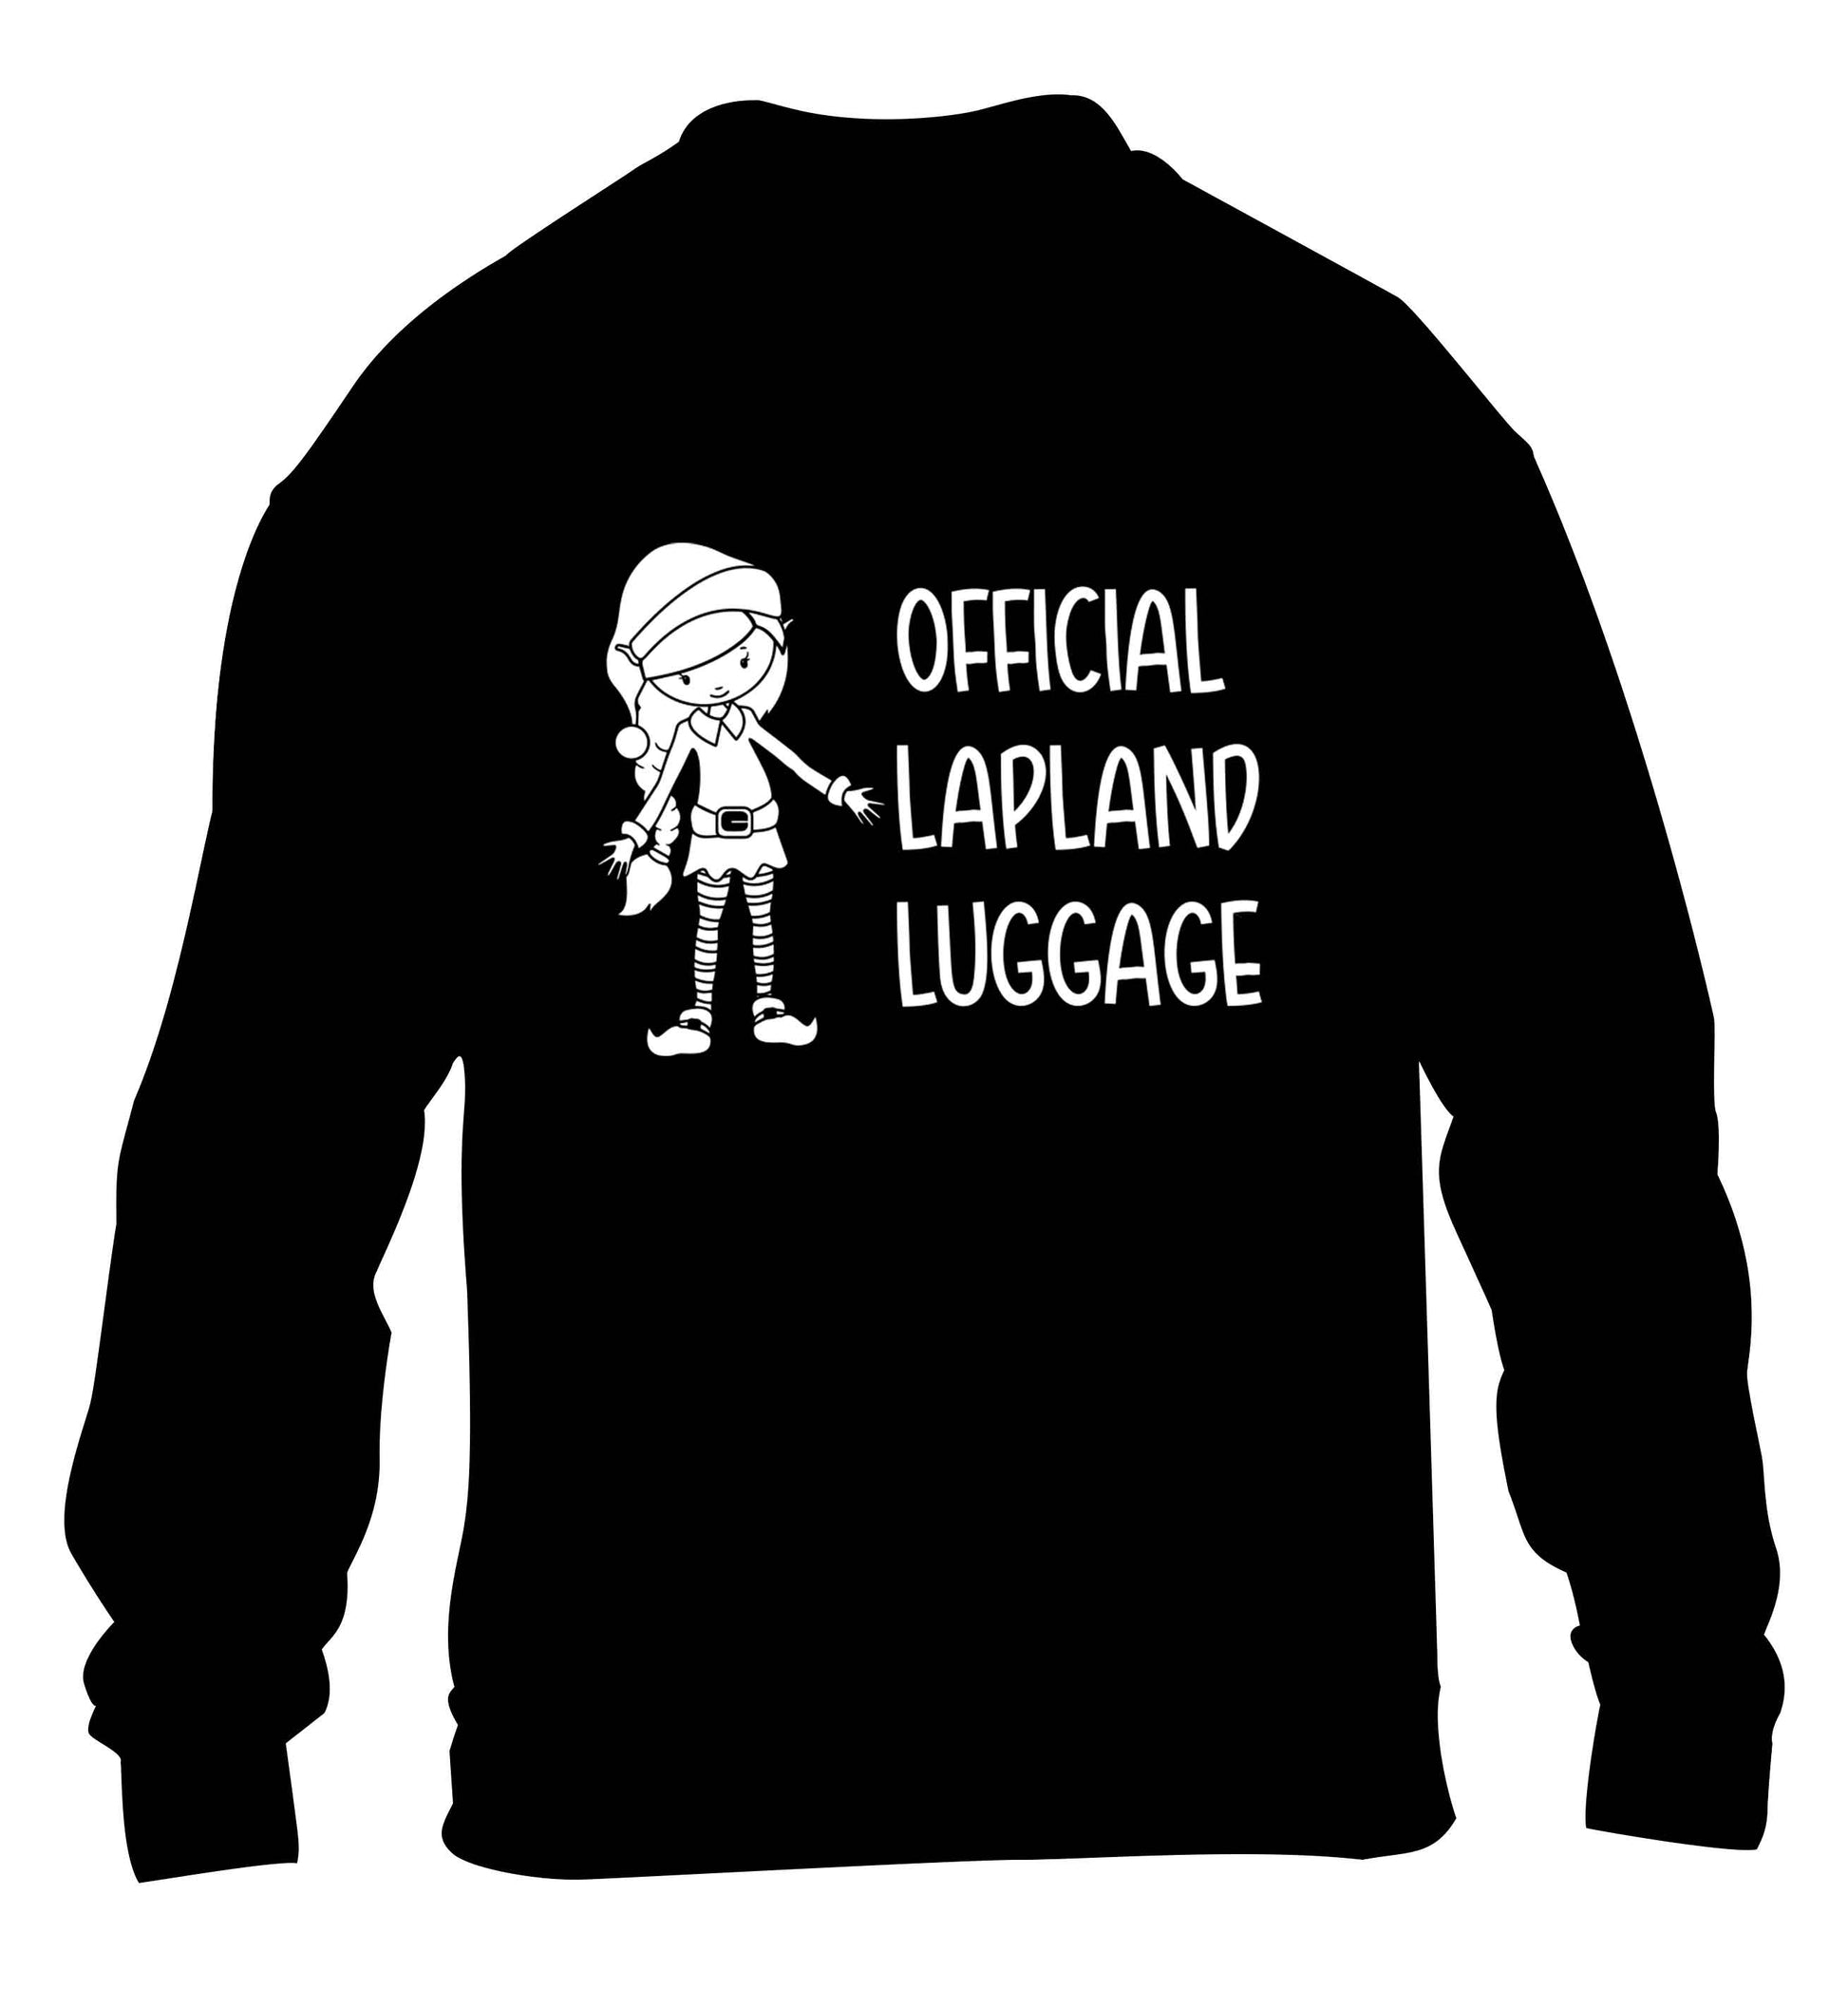 Official lapland luggage - Elf snowflake children's black sweater 12-13 Years